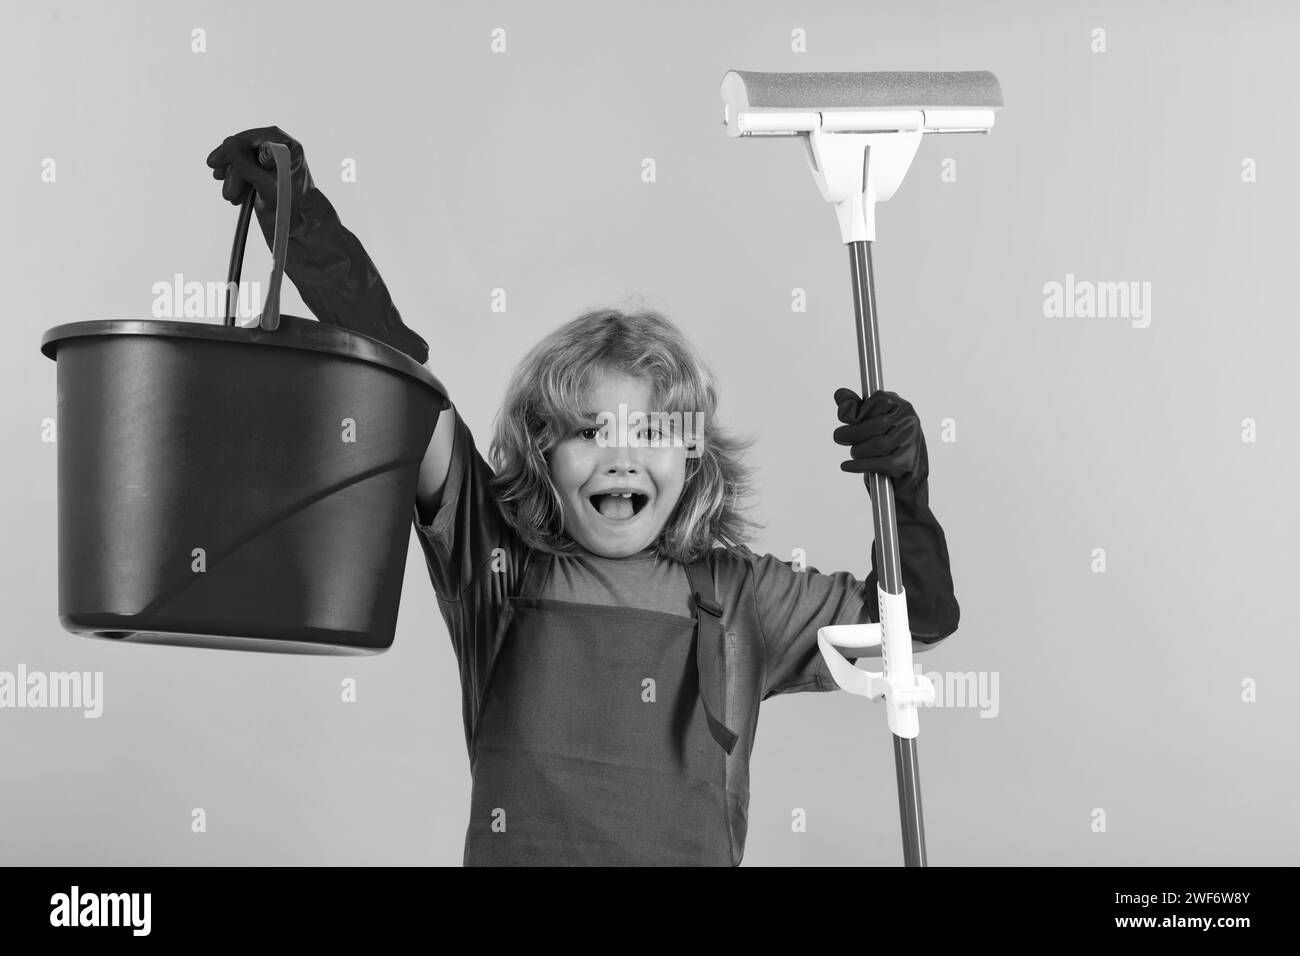 Cleaning house. Studio isolated portrait of child mopping house, cleaning home. Detergents and cleaning accessories. Cleaning service. Little boy Stock Photo